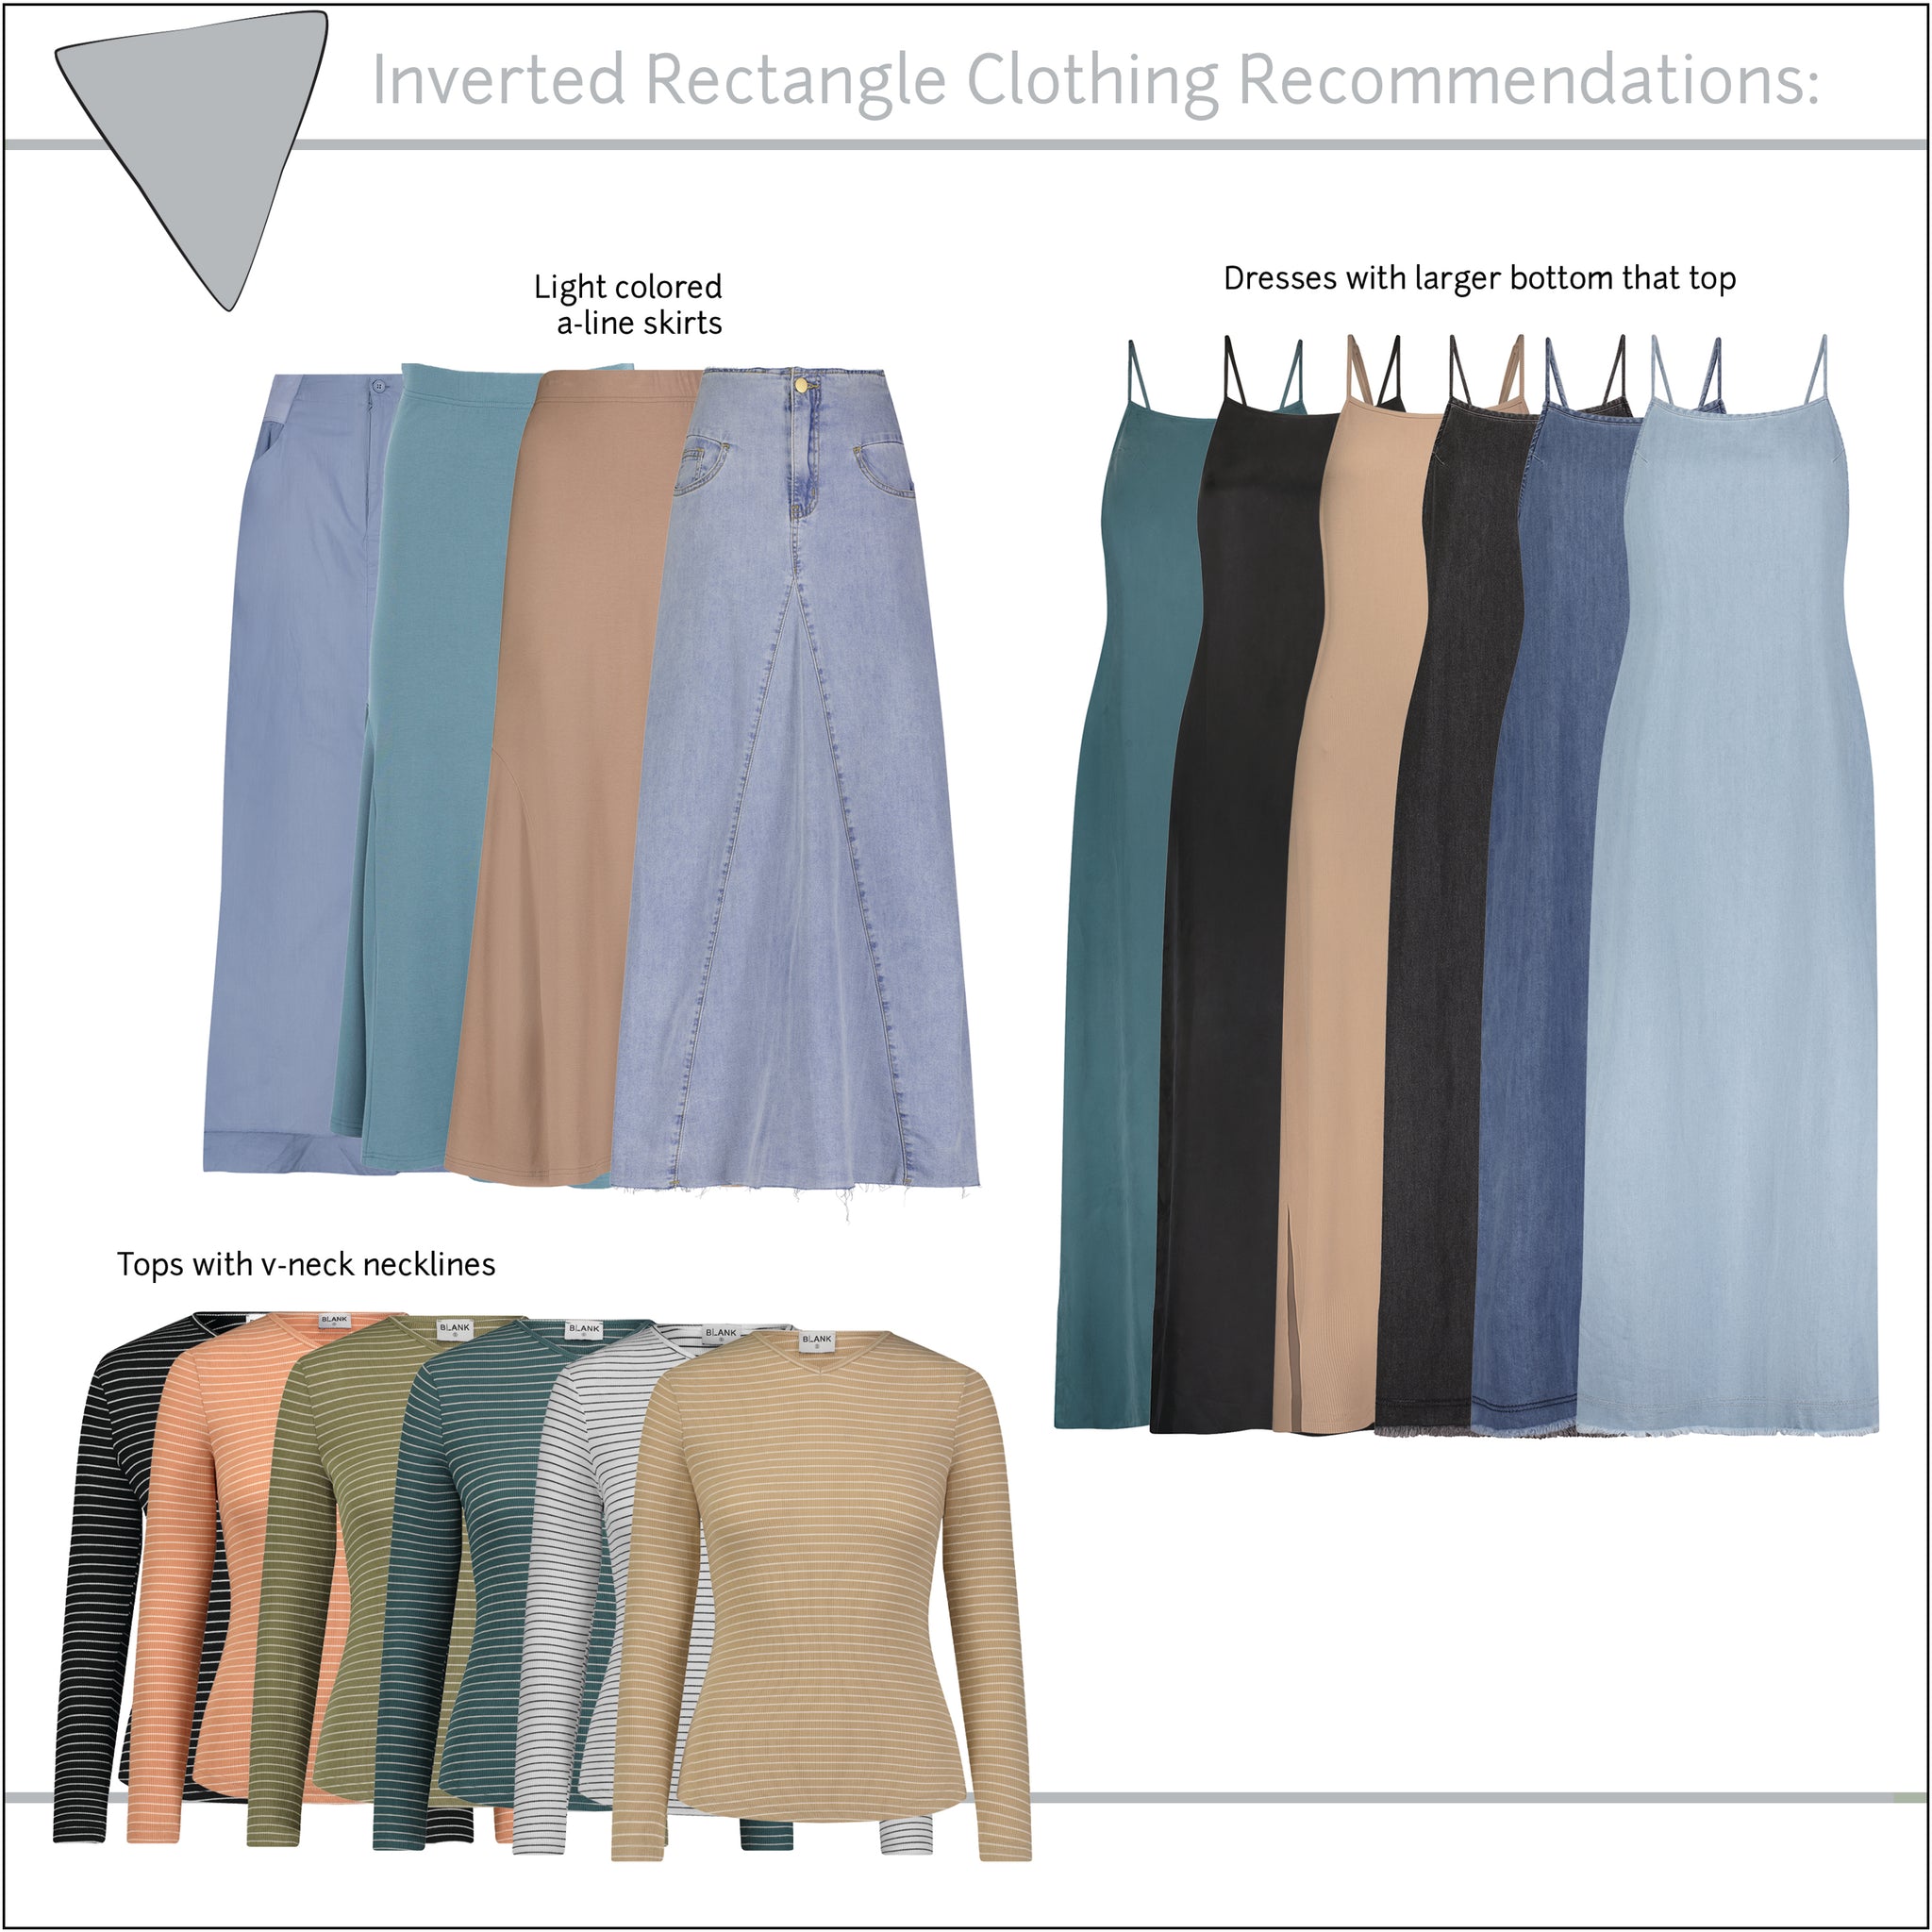 How to dress for an inverted triangle figure